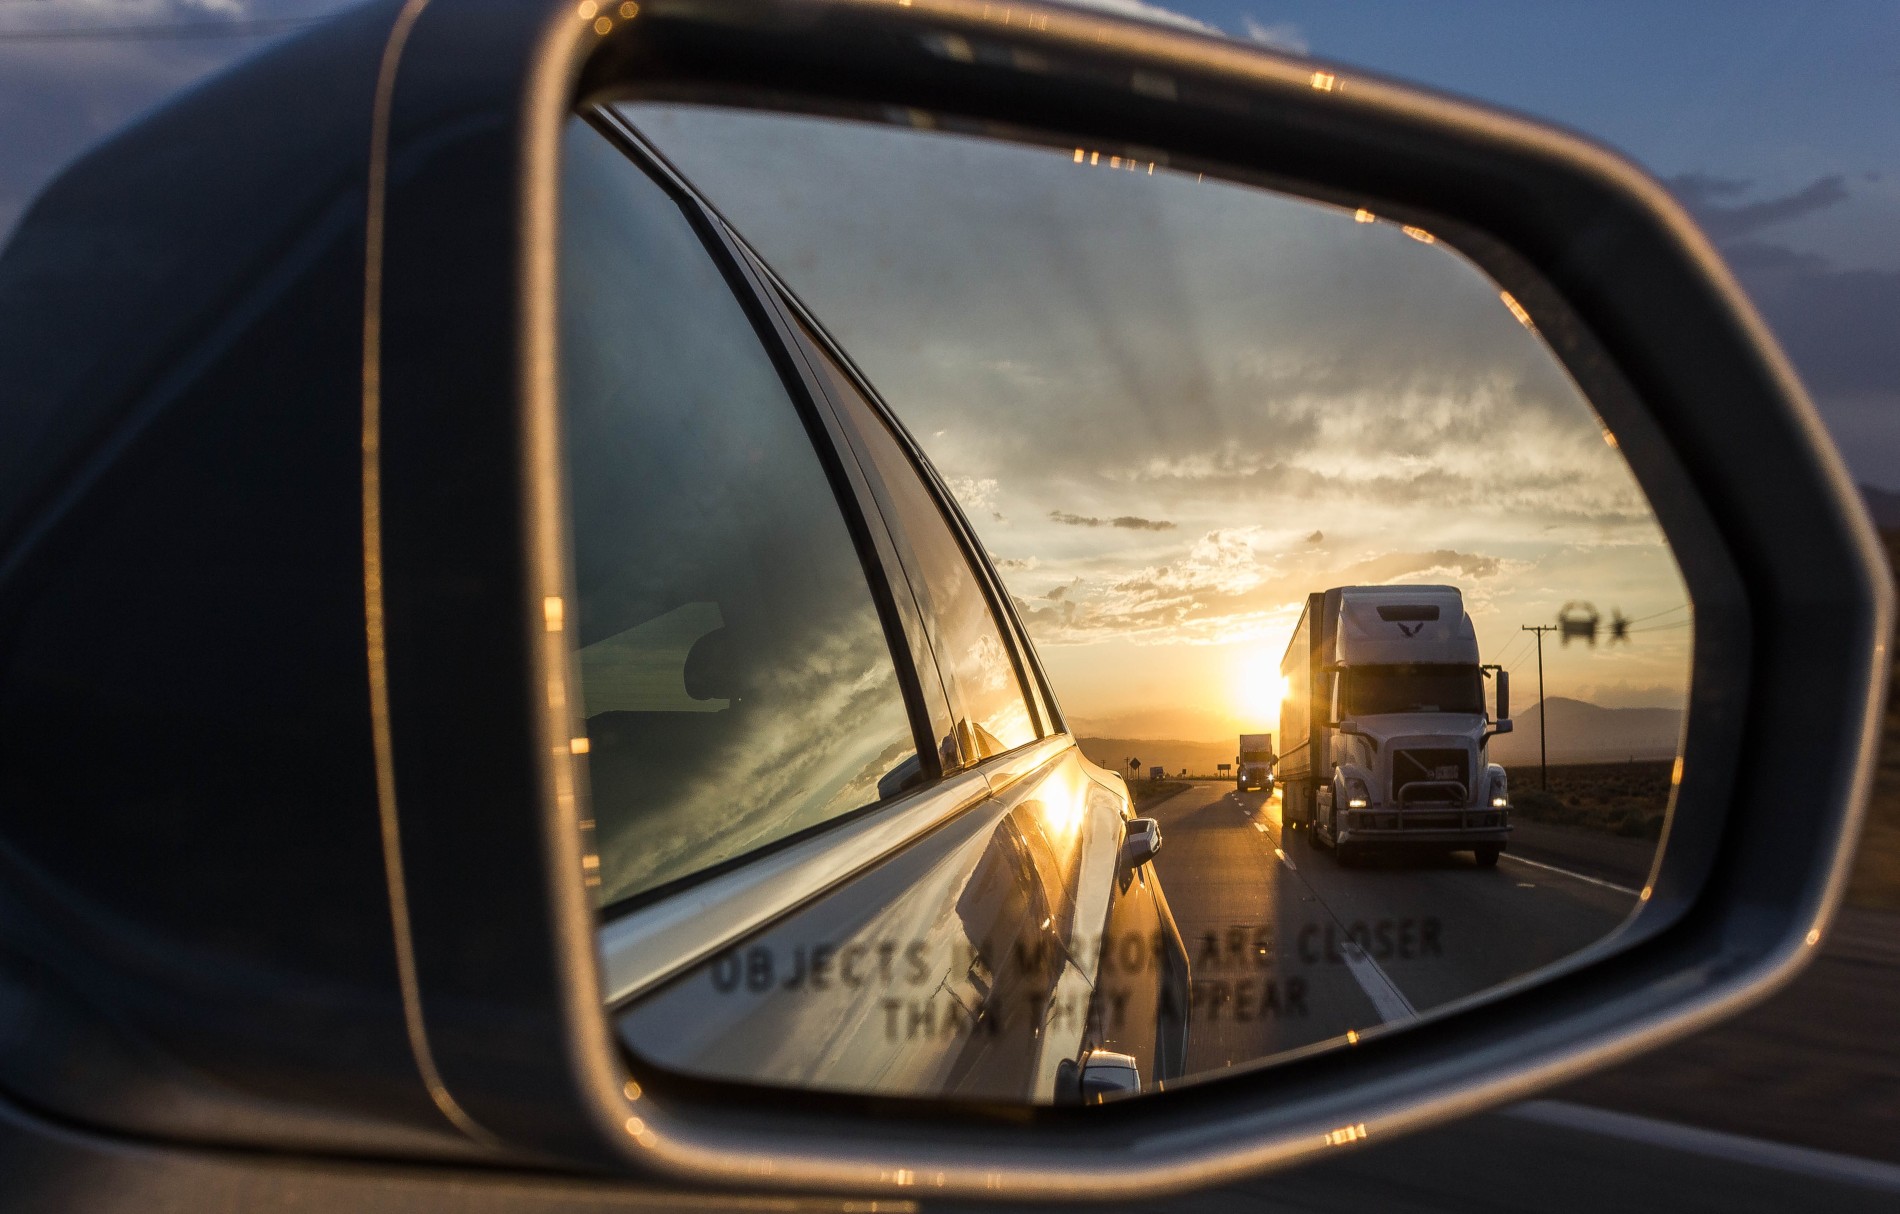 Vehicle side mirror reflecting a heavy haulage truck with the sun setting in the background